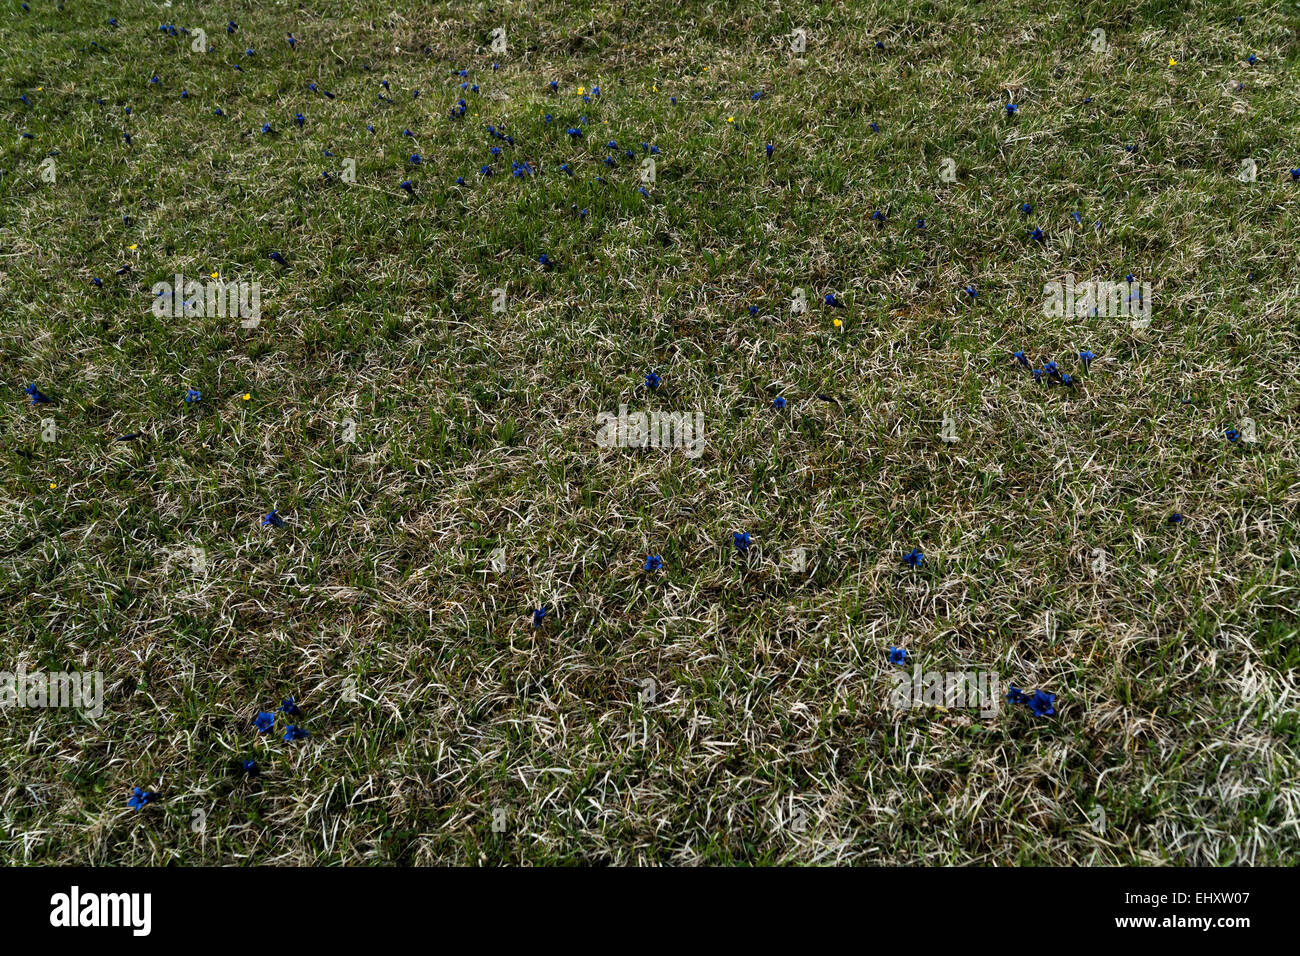 Germany, Oberammergau, calcareous grassland with trumpet gentians and creeping buttercups Stock Photo